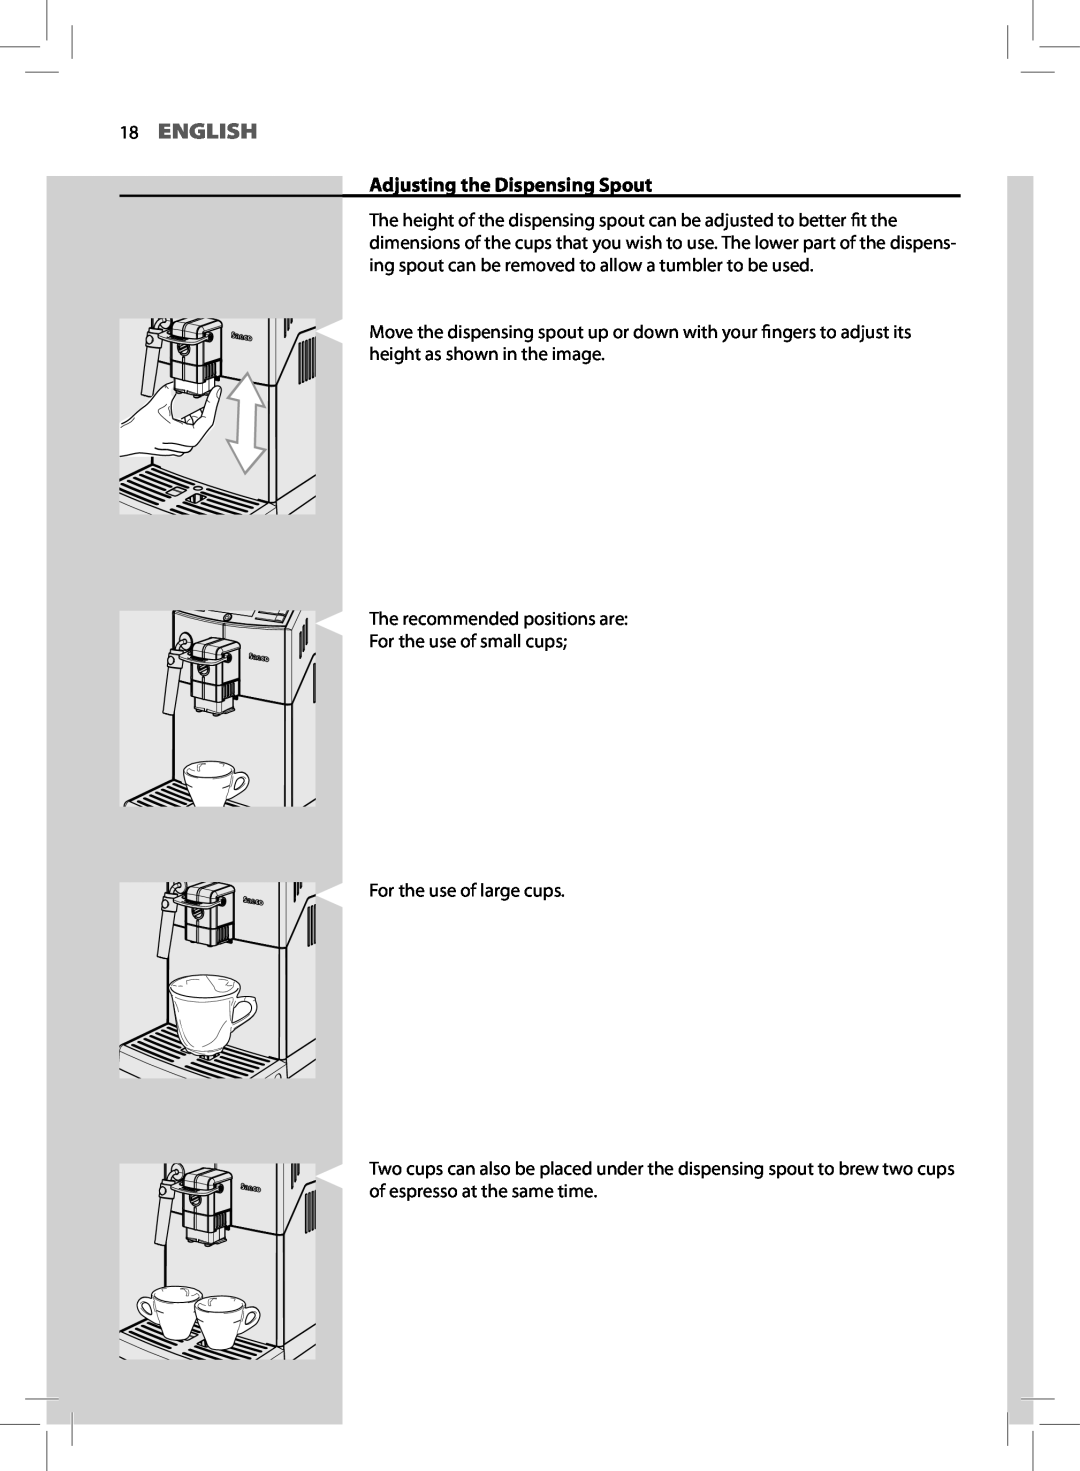 Saeco Coffee Makers HD8775 user manual 18ENGLISH, Adjusting the Dispensing Spout 